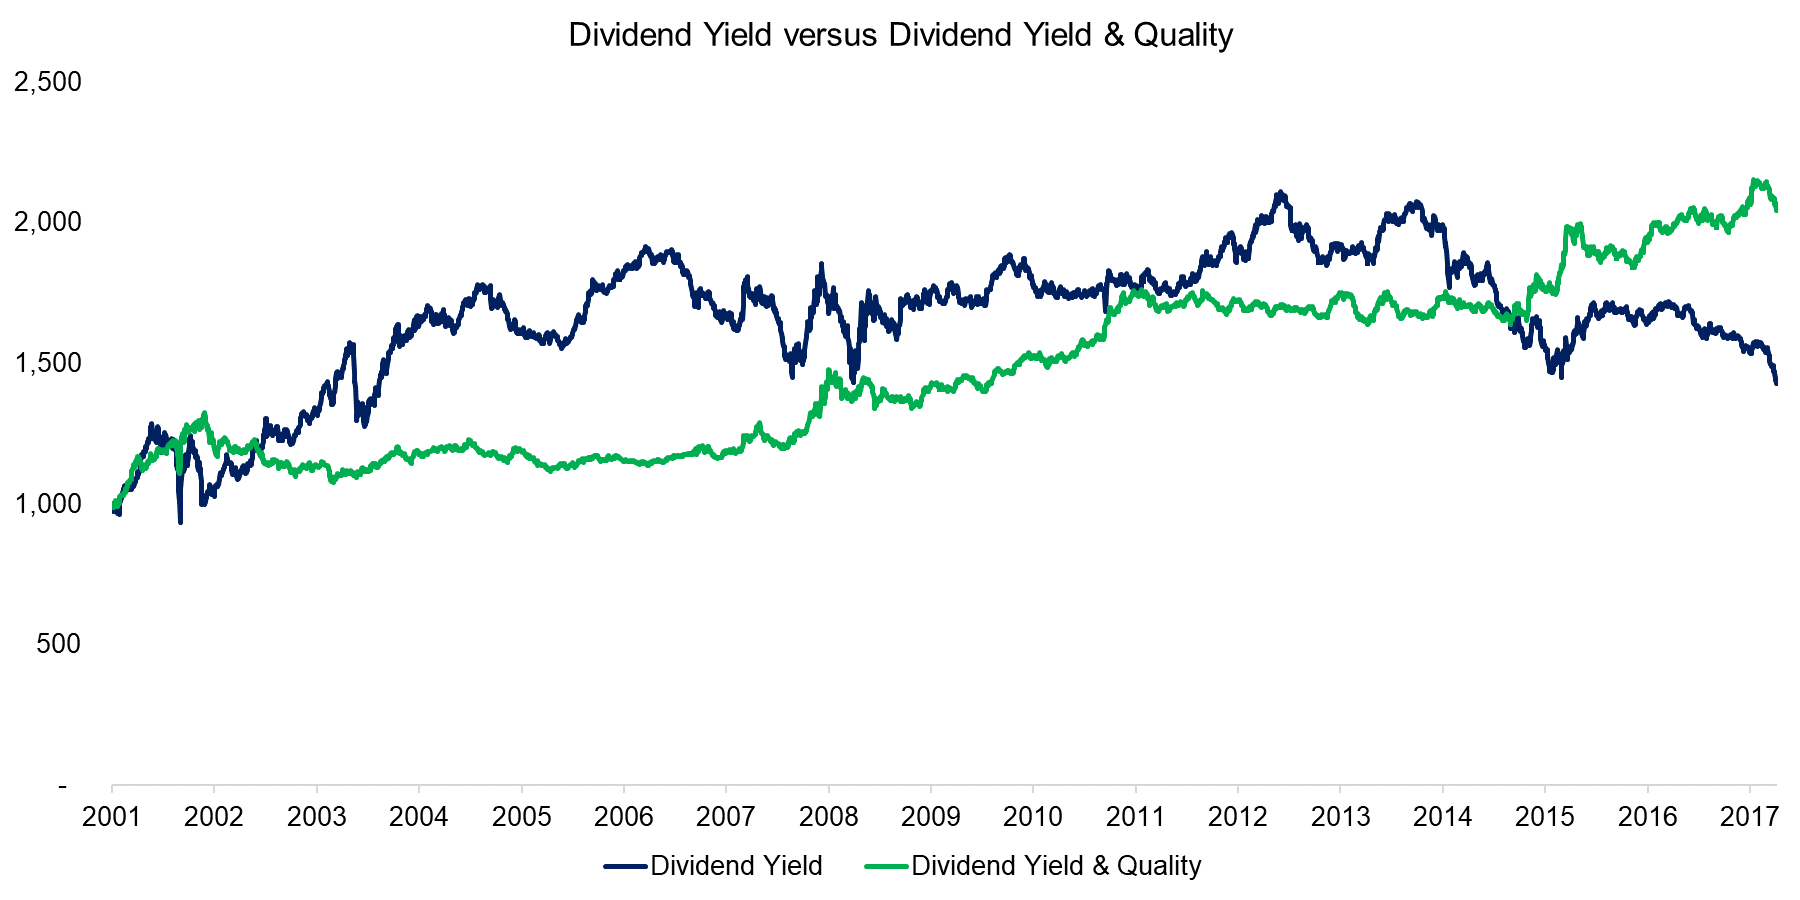 Dividend Yield versus Dividend Yield & Quality